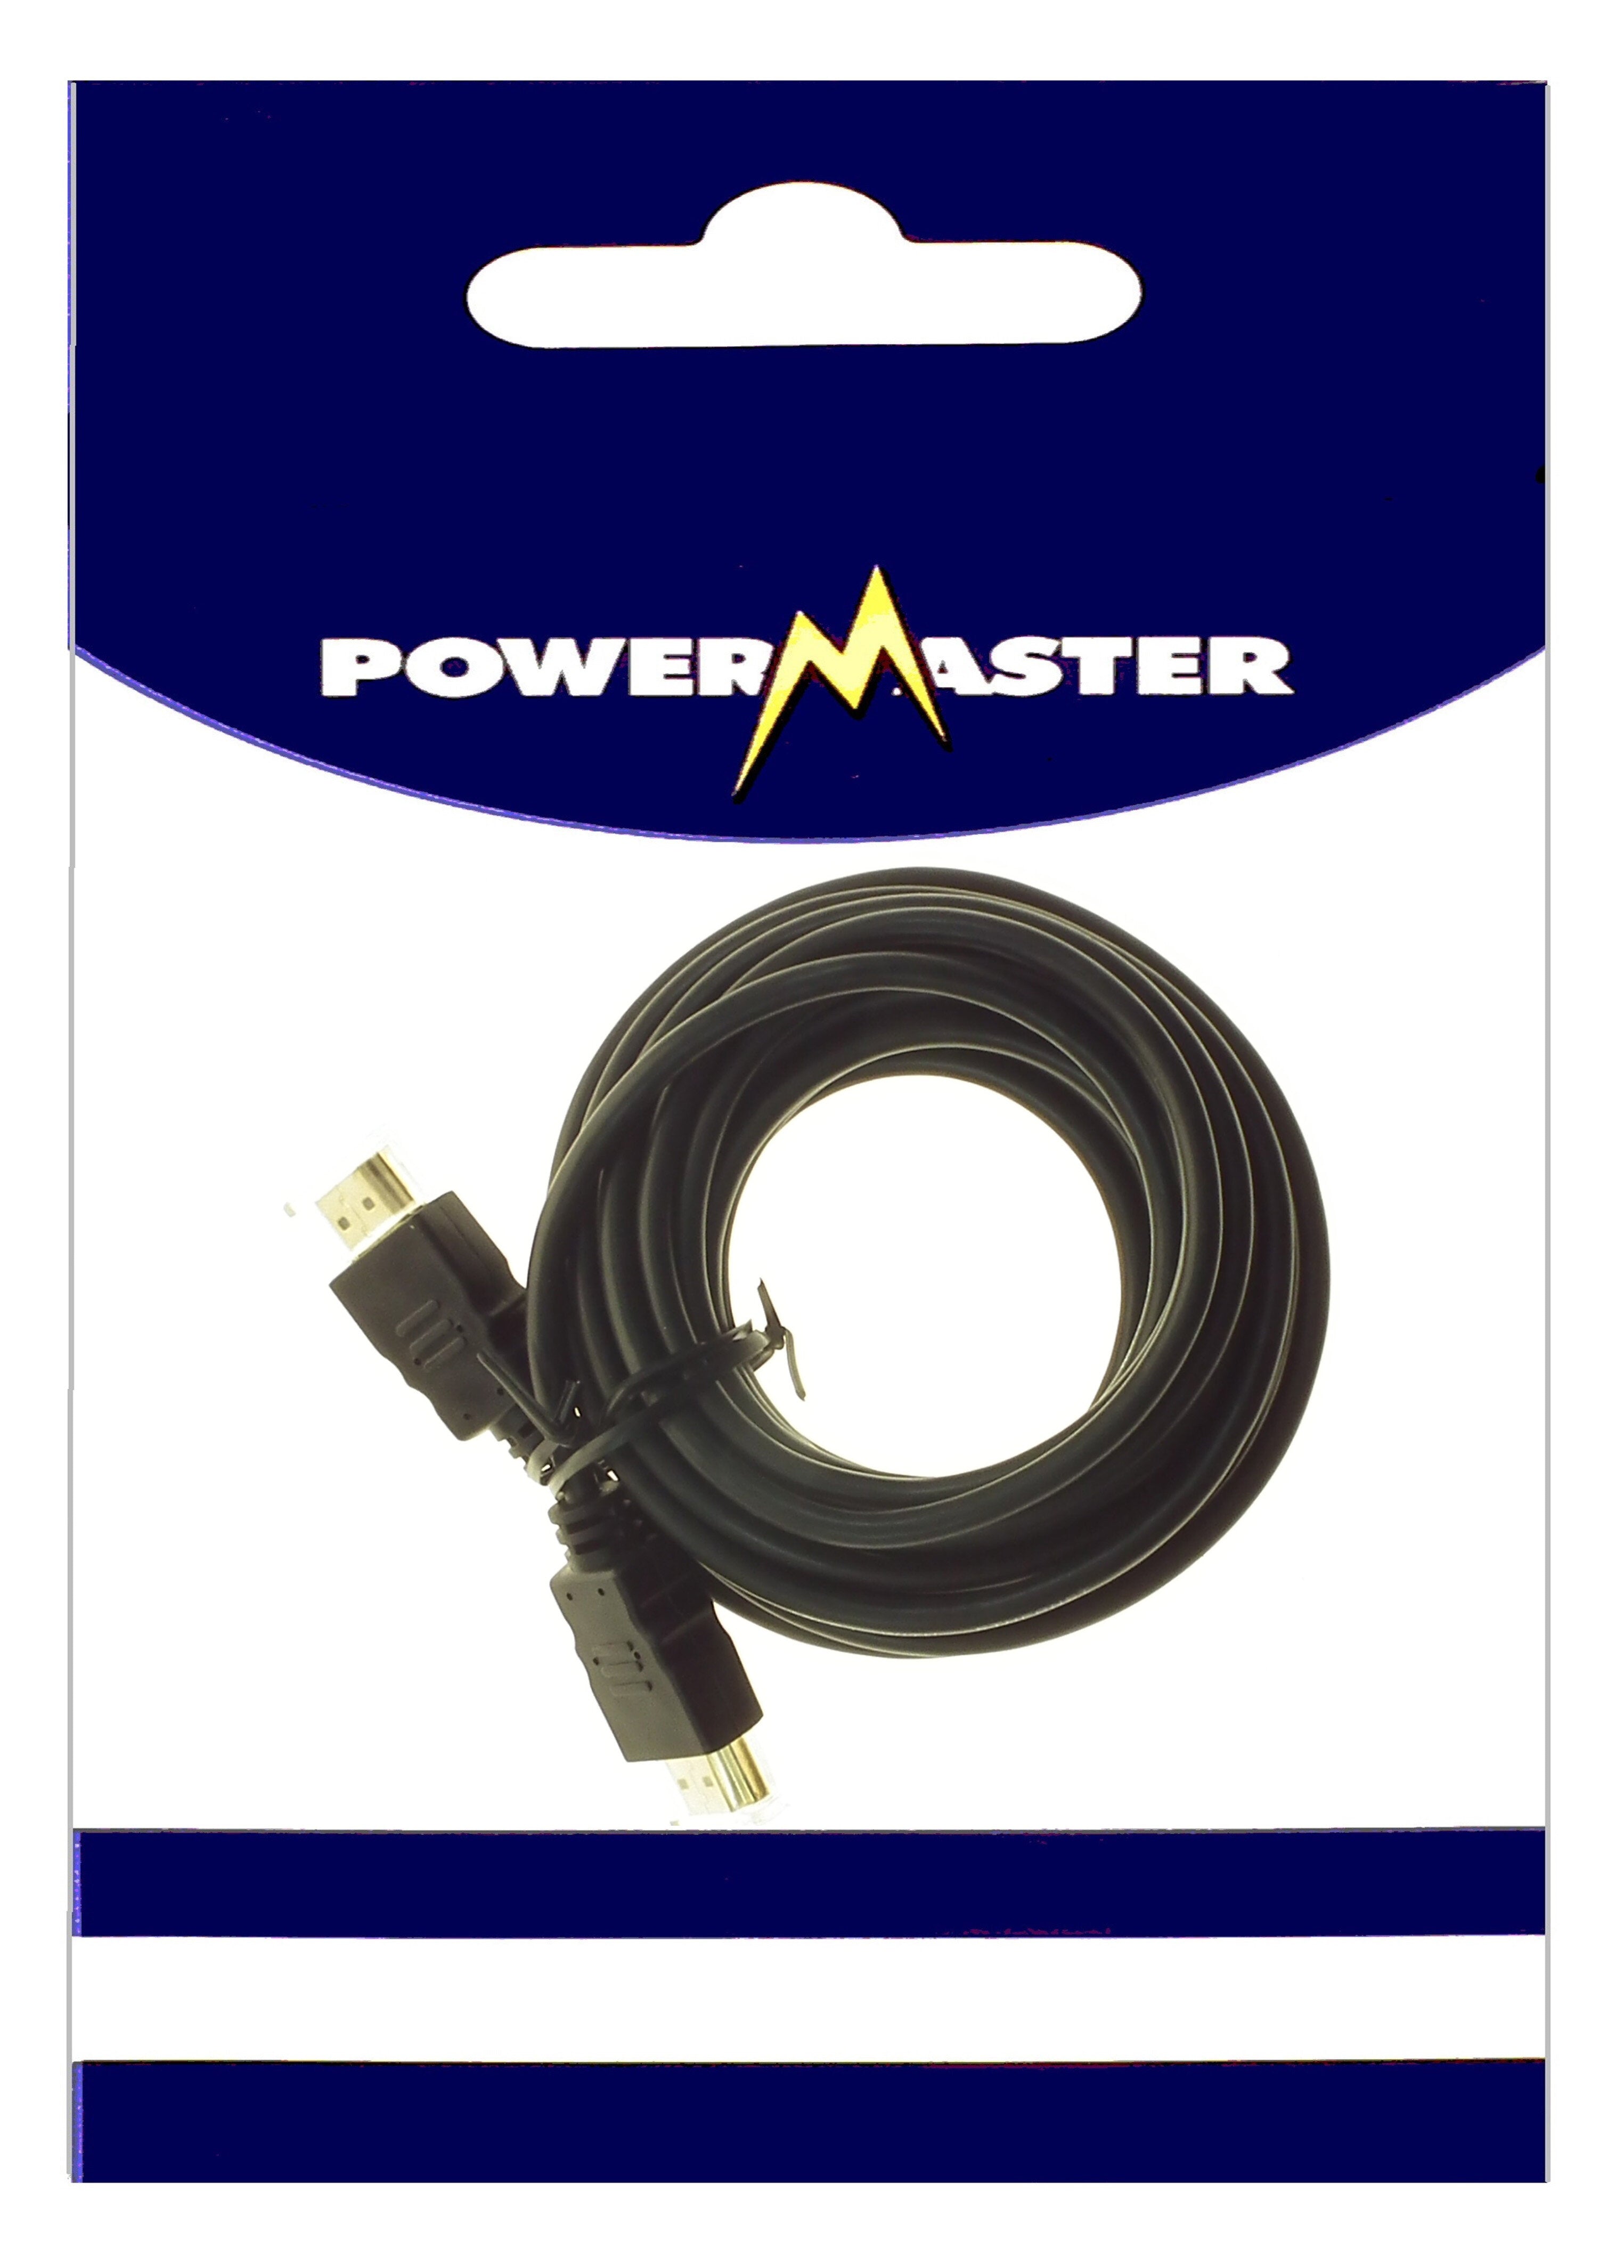 General Hardware | HDMI Cable - 5m by Weirs of Baggot St